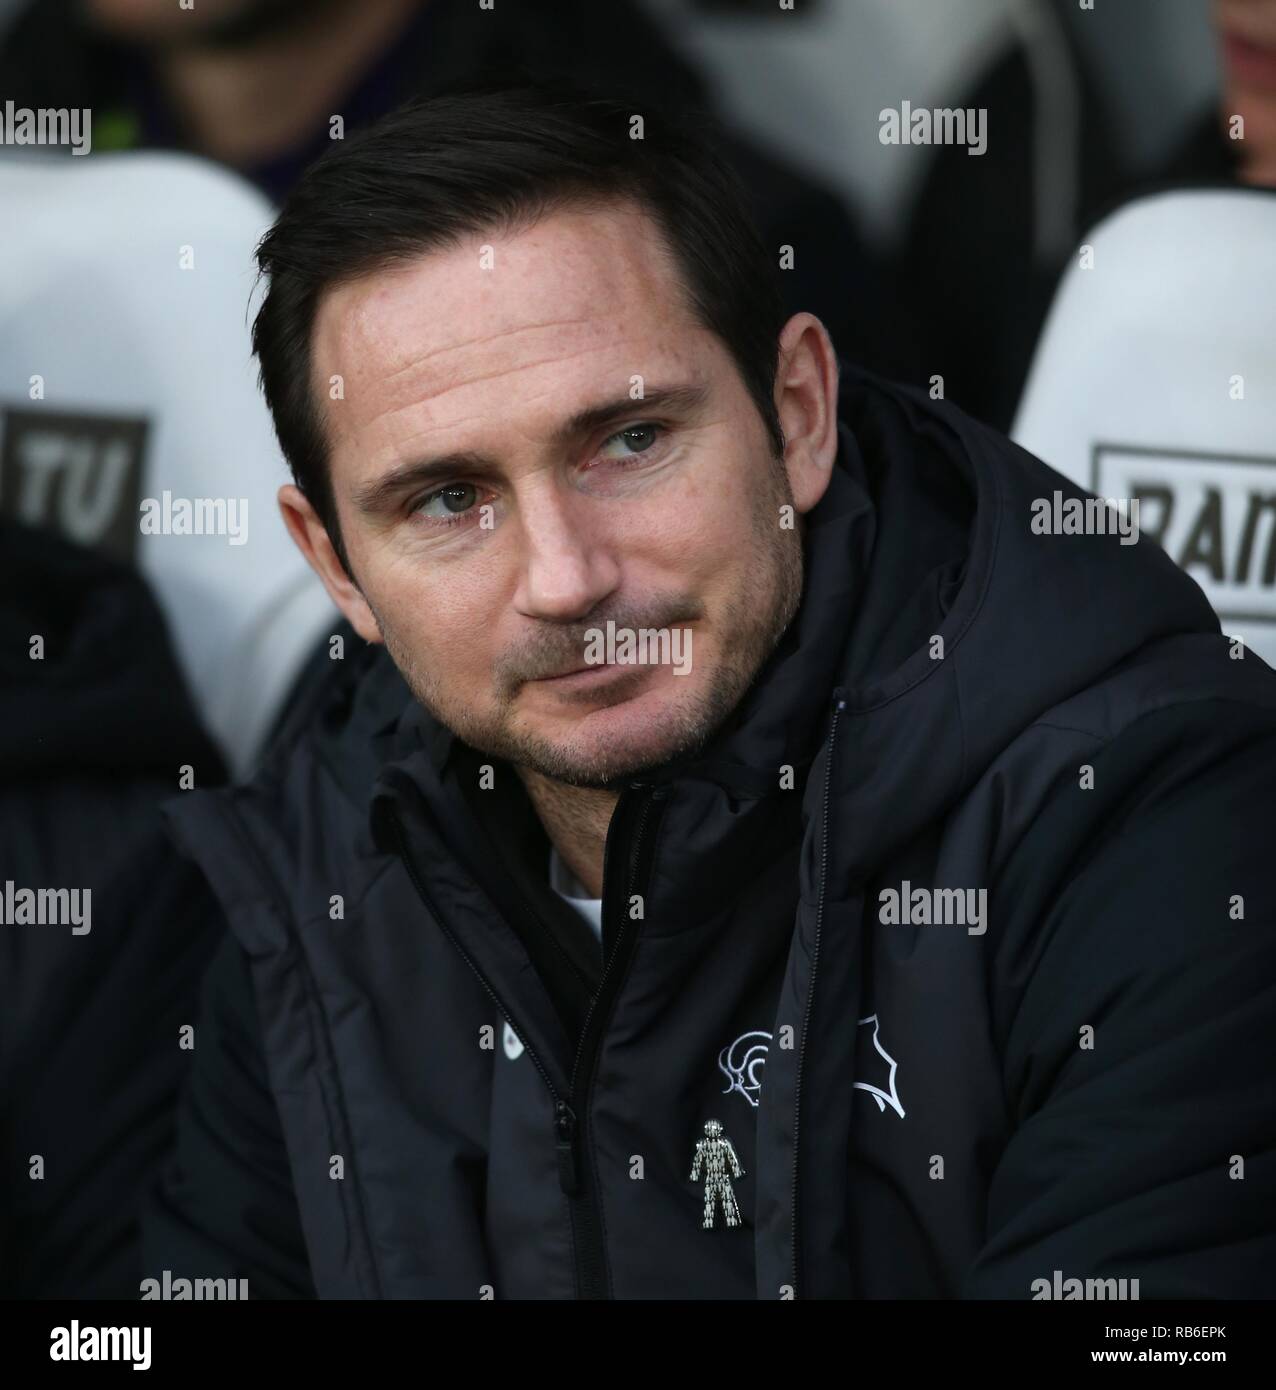 FRANK LAMPARD, DERBY COUNTY MANAGER, DERBY COUNTY V SOUTHAMPTON, die Emirate FA Cup 3. Runde, 2019 Stockfoto